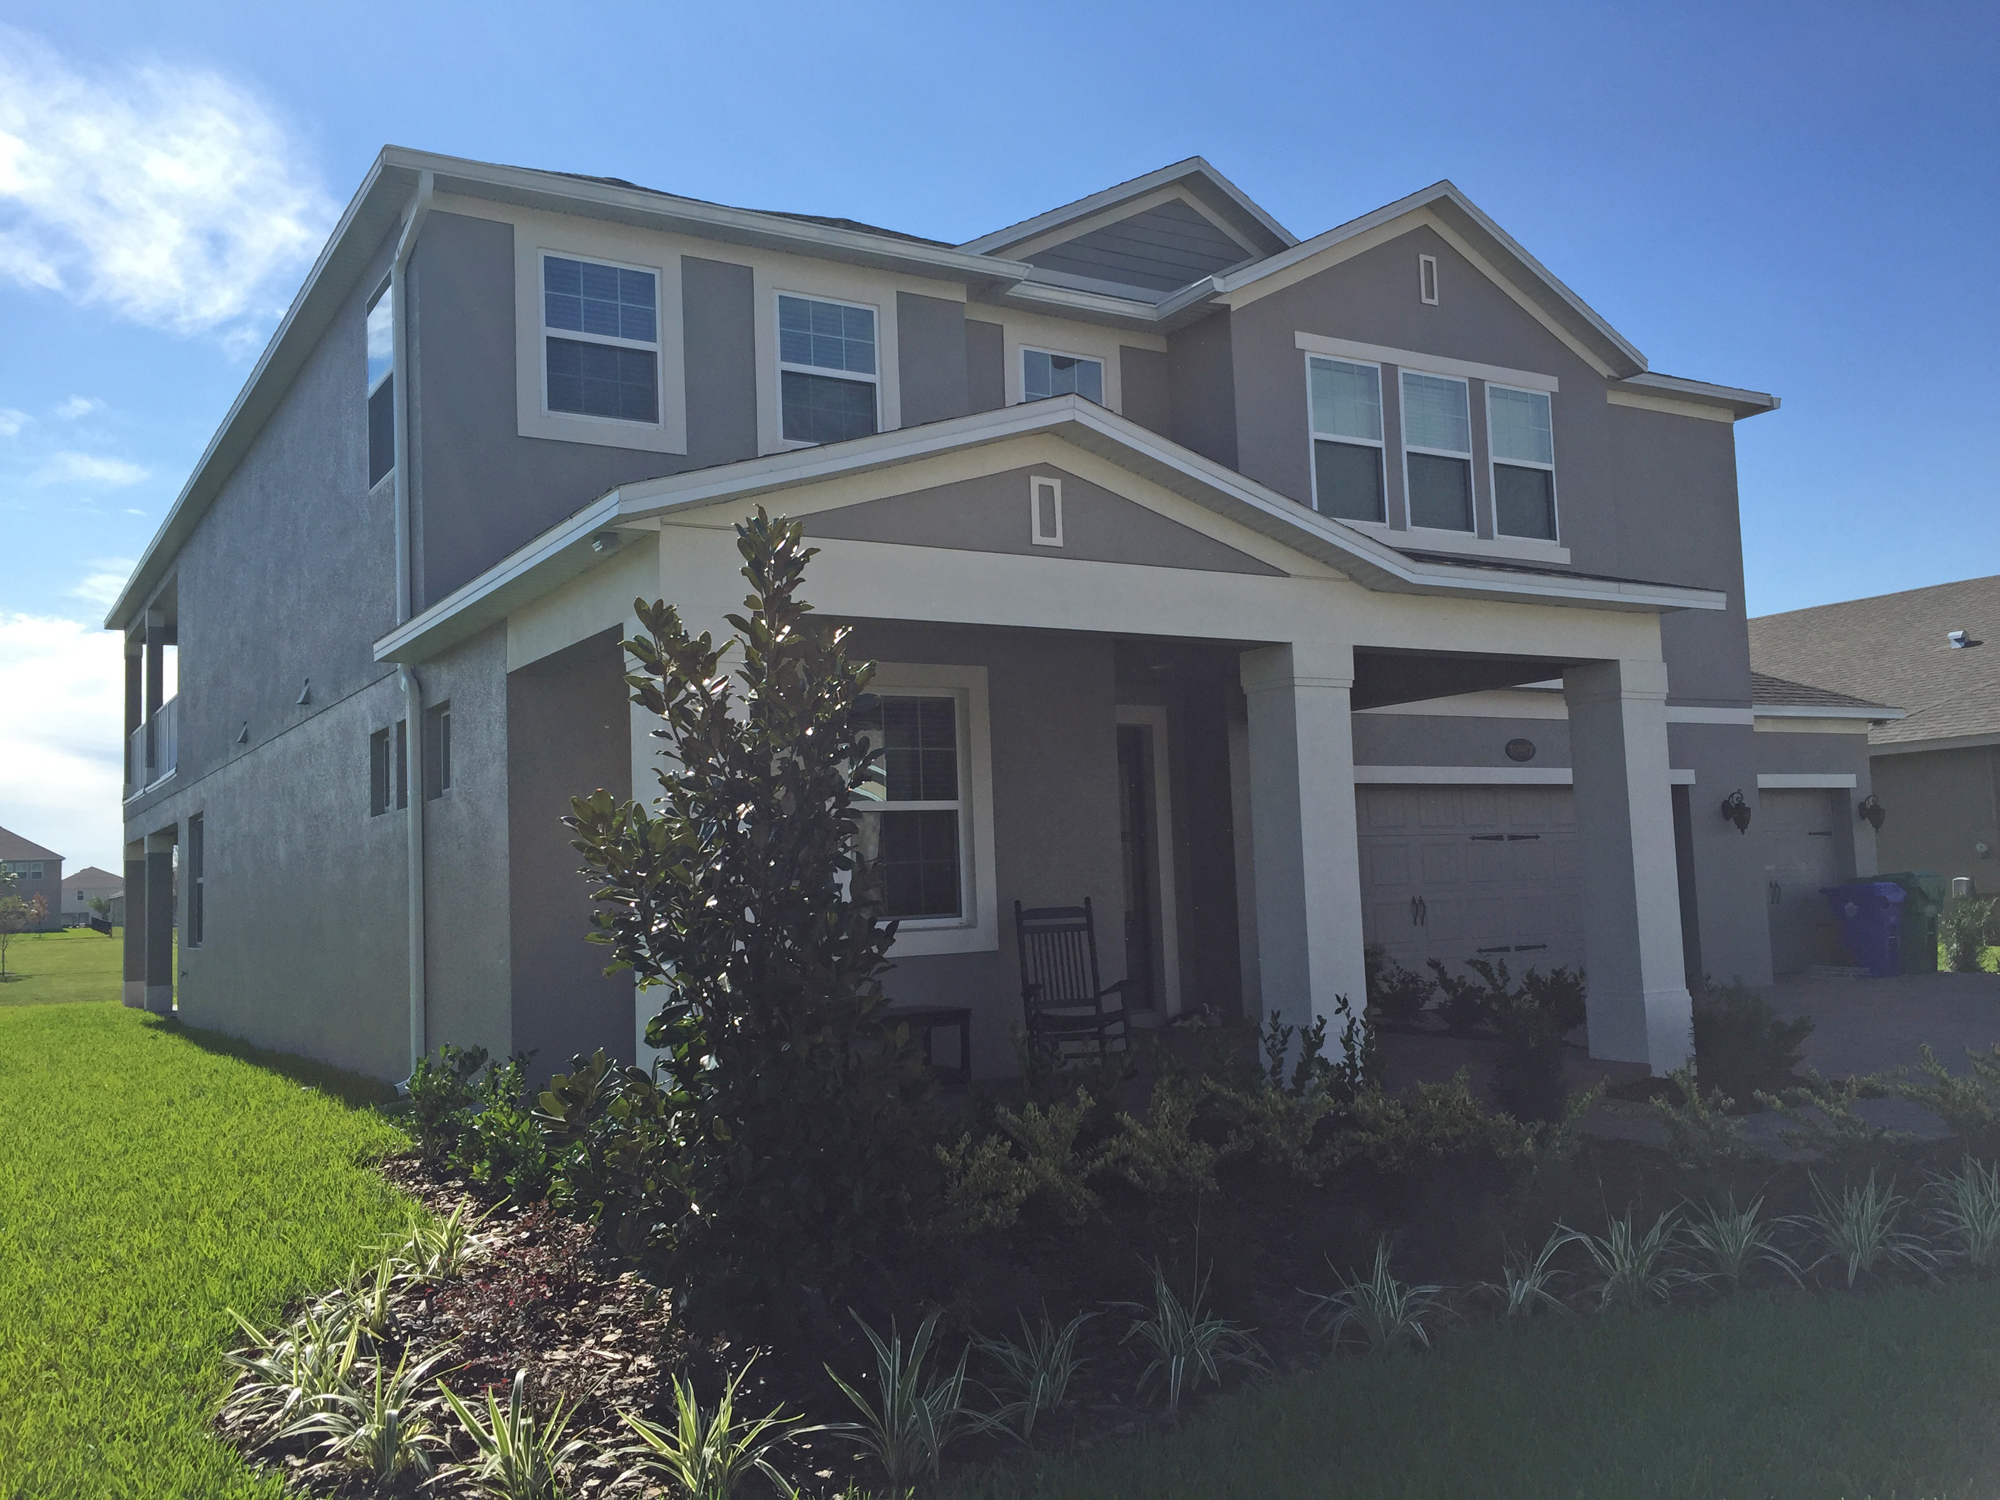 The home at 15977 Johns Lake Overlook Drive, Winter Garden, sold Jan. 5, for $564,075.